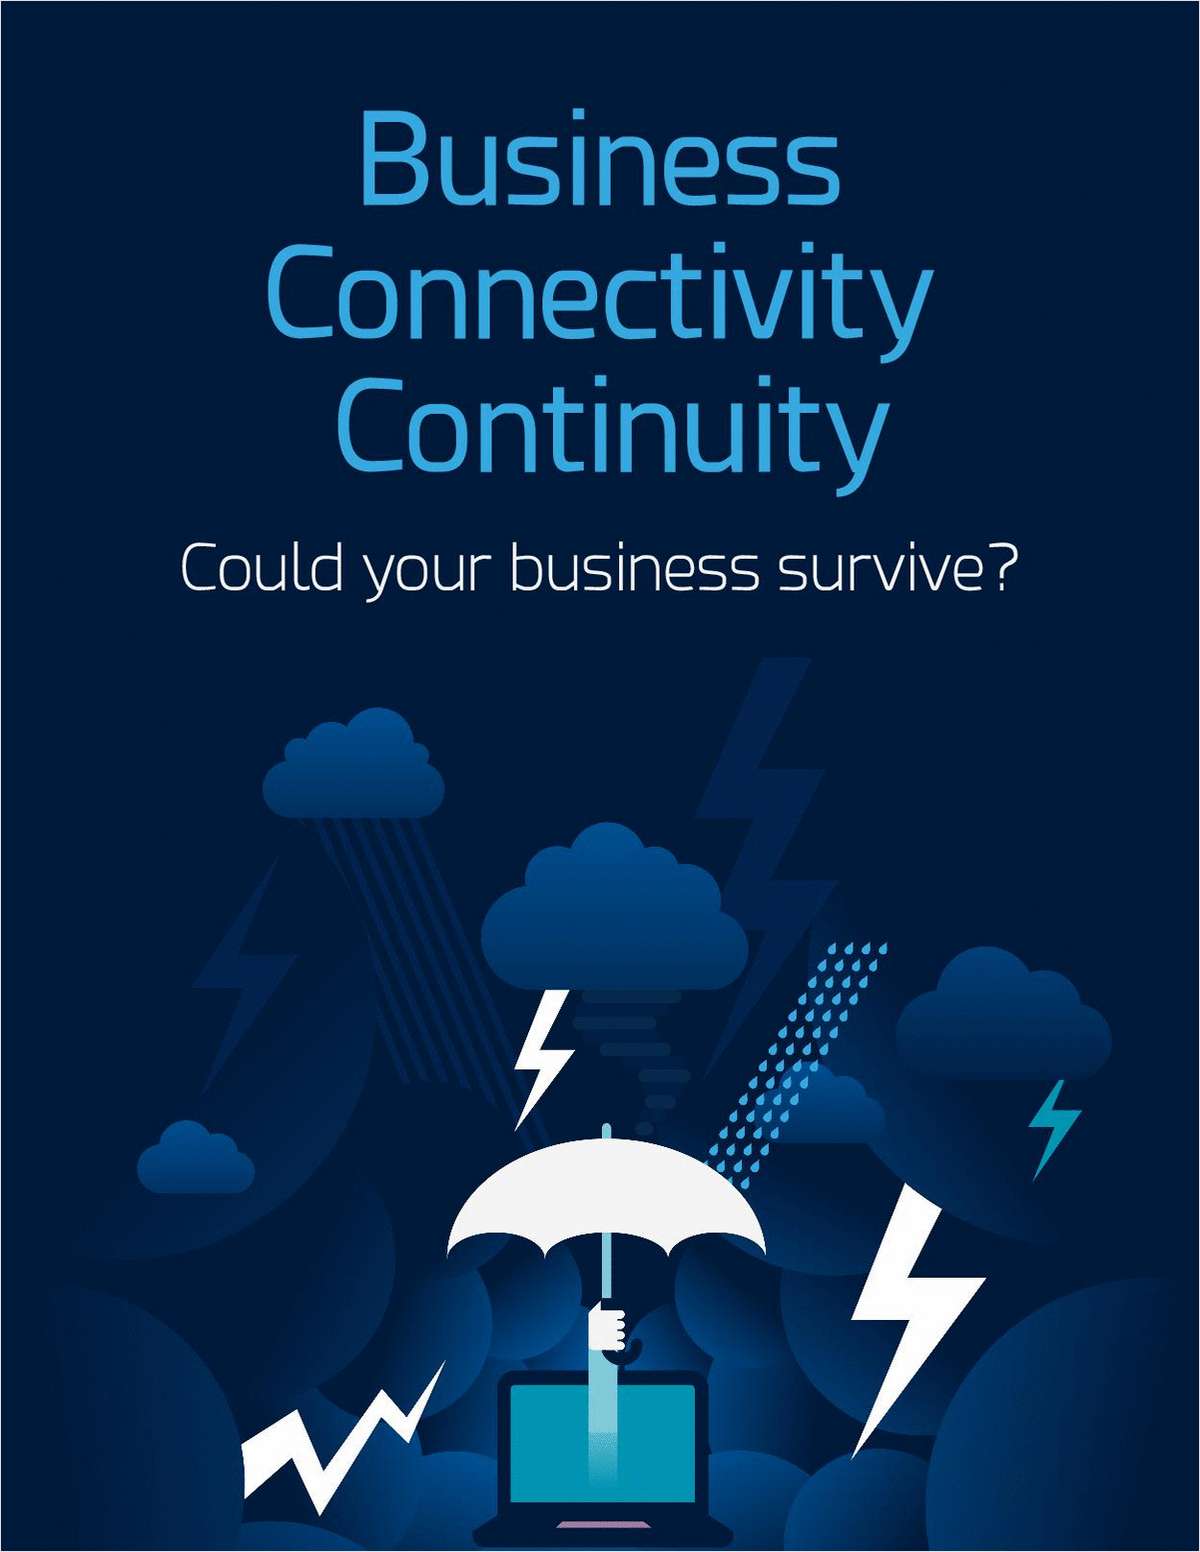 Business Connectivity Continuity